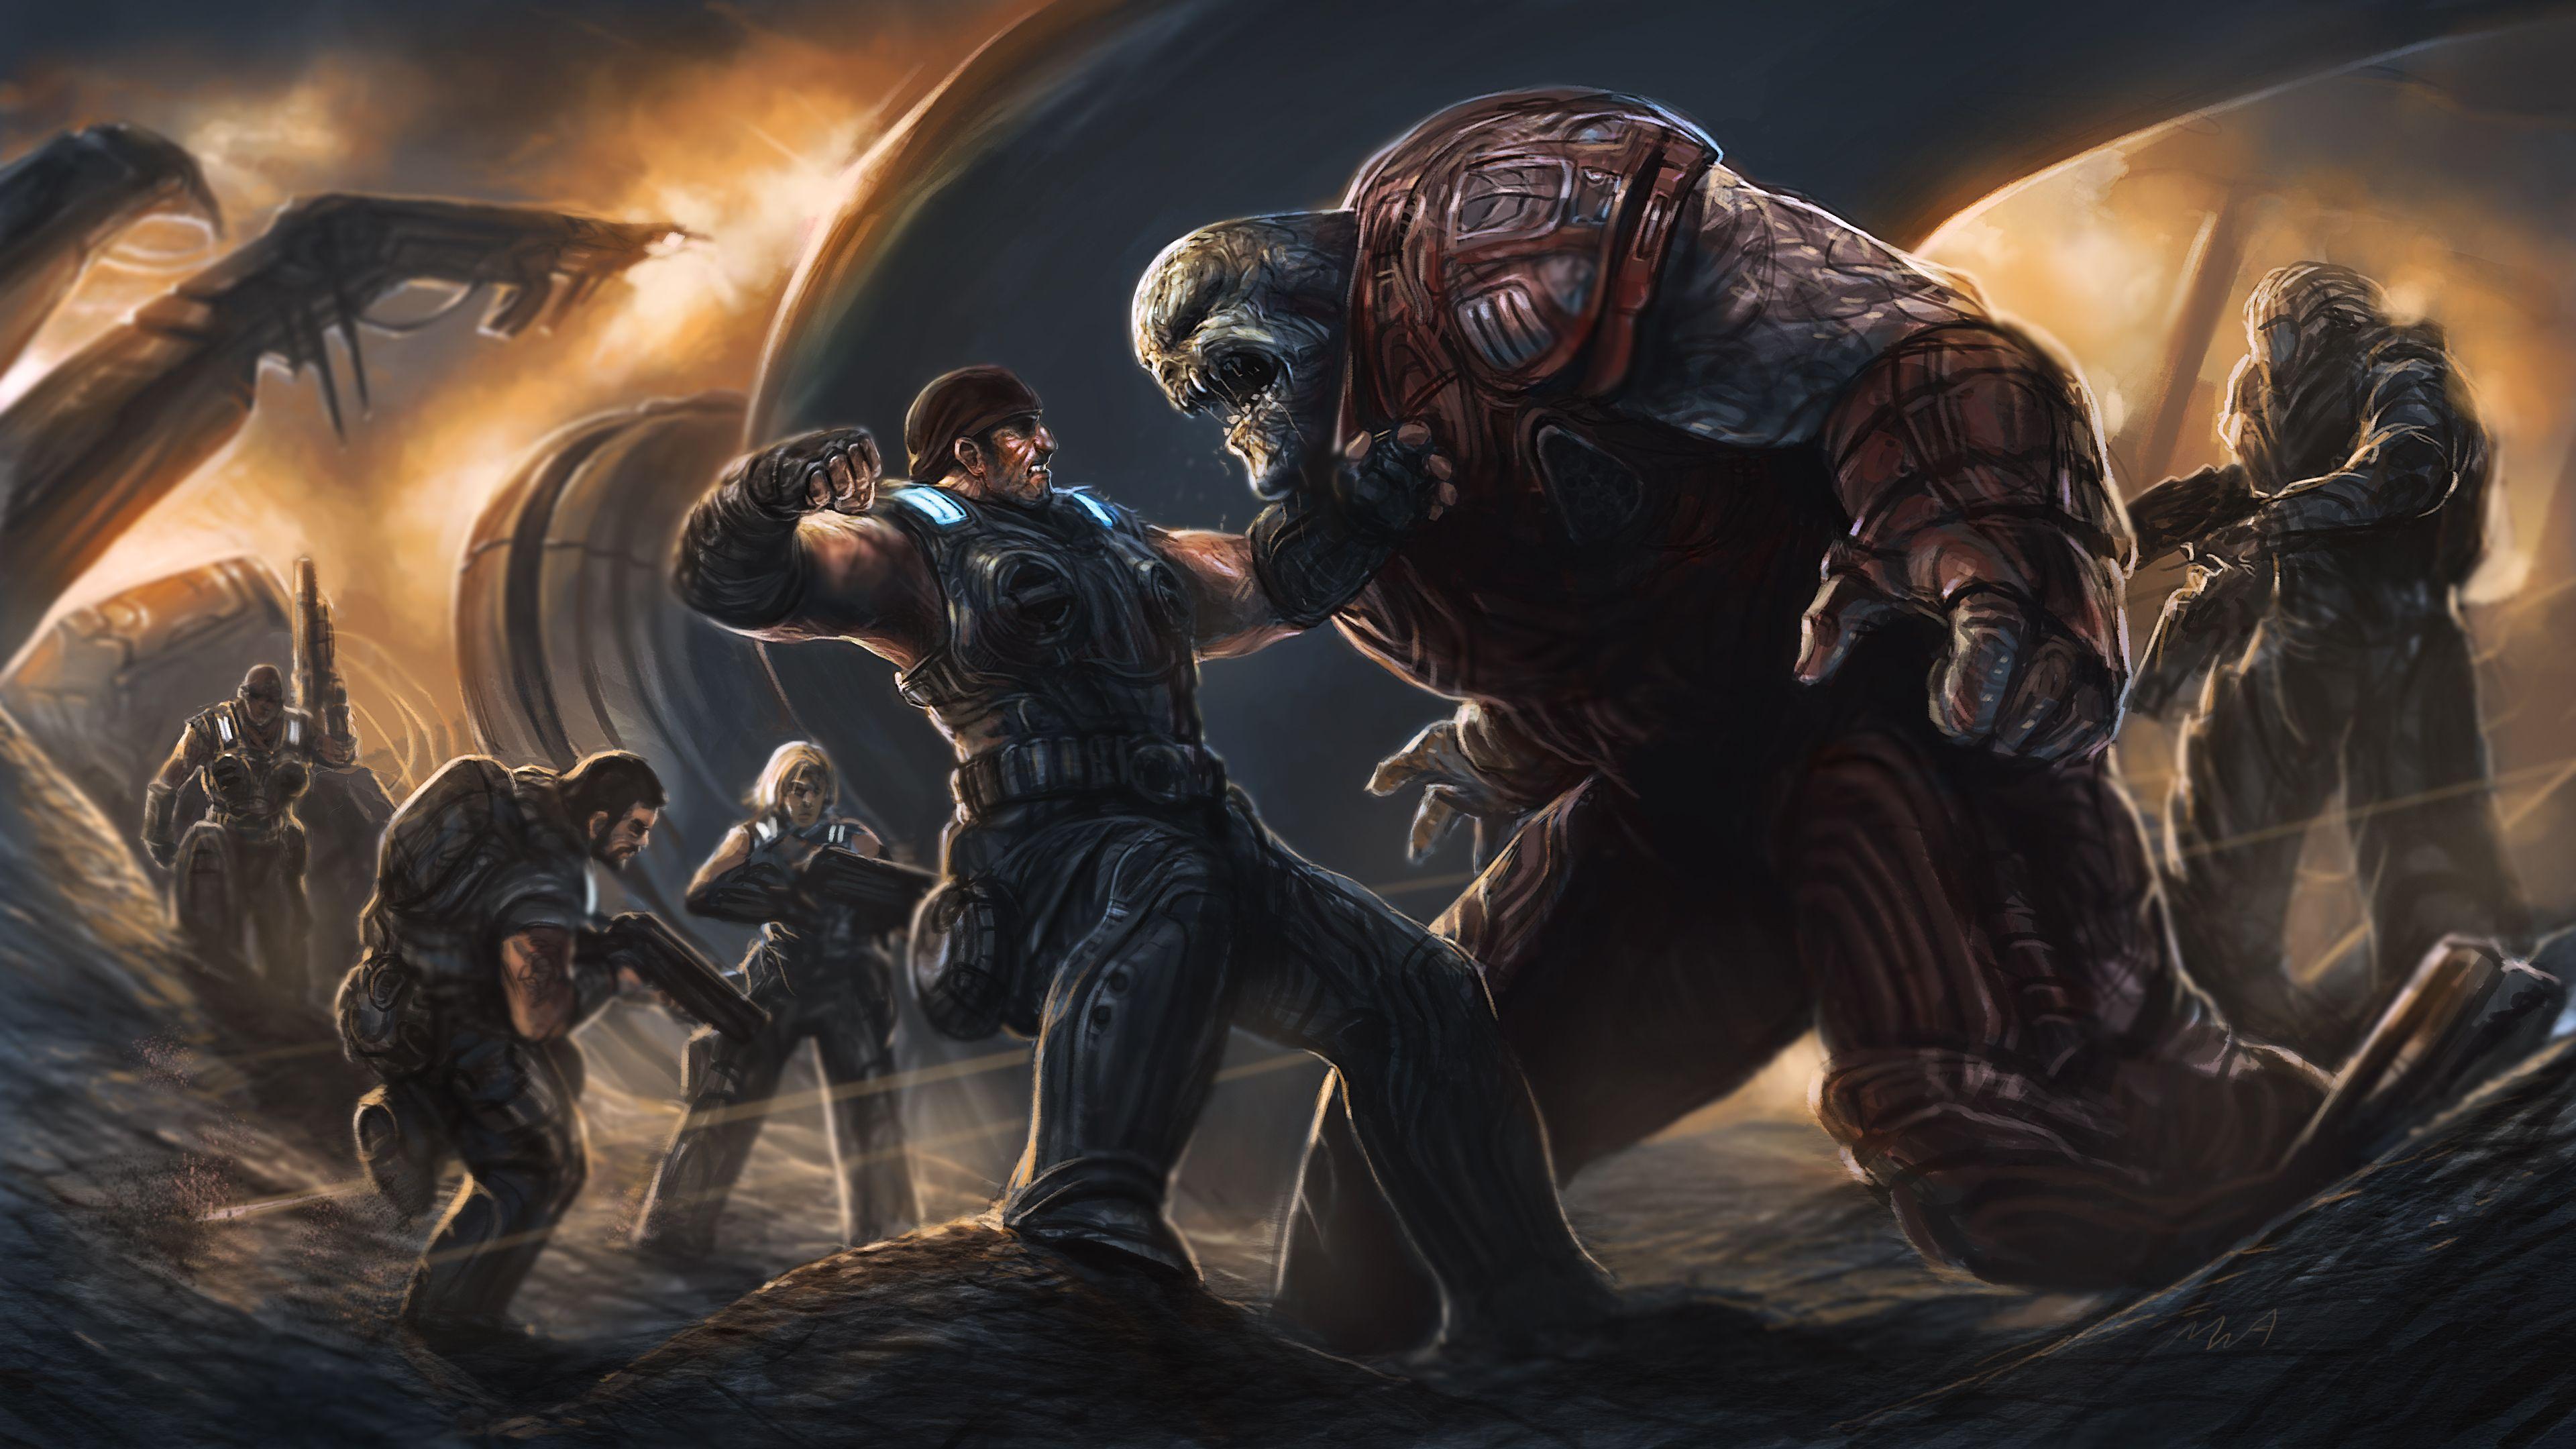 Gears of War Baird wallpapers by IReckLess